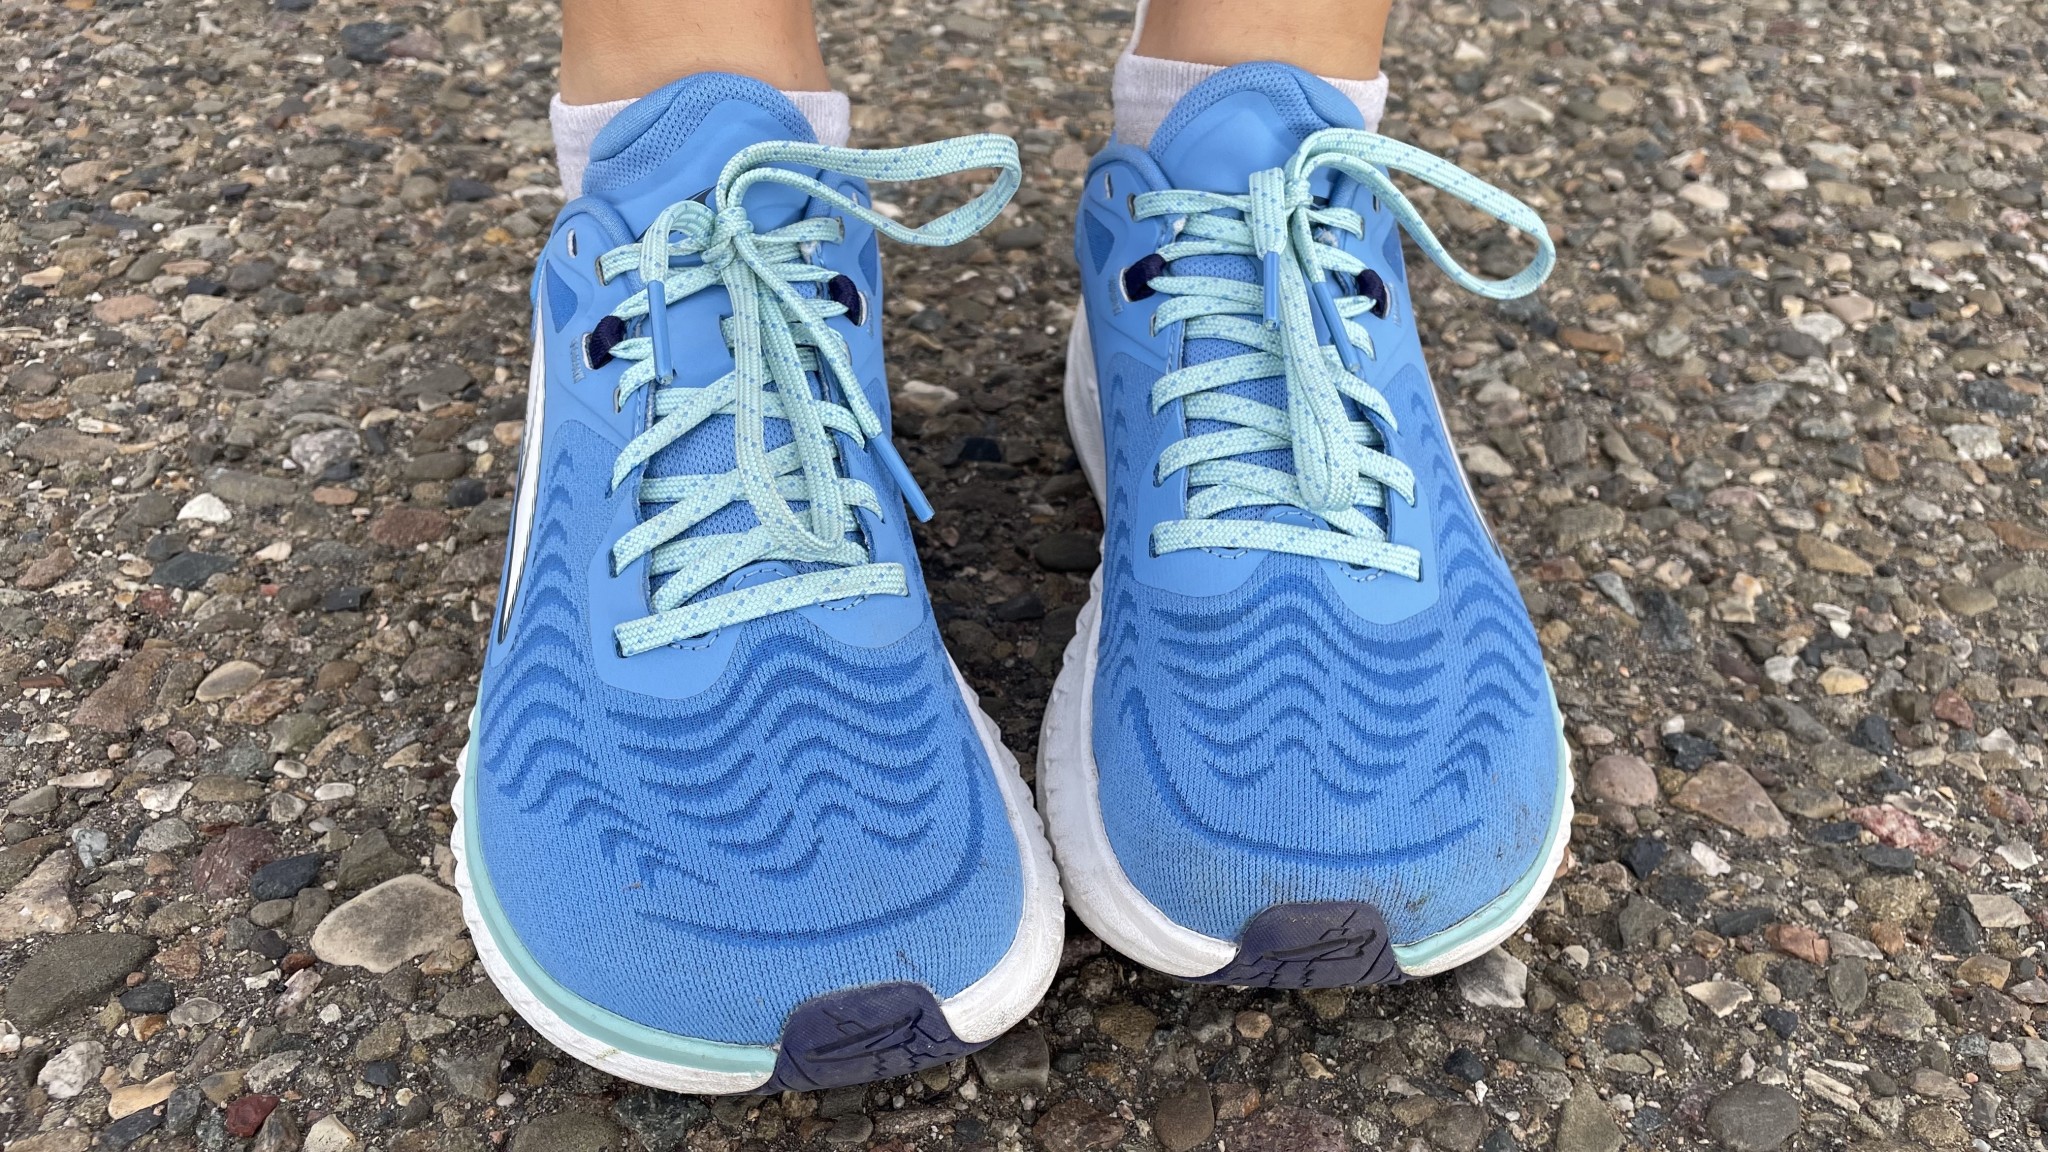 Altra Torin 7 - Women's Review | Tested & Rated